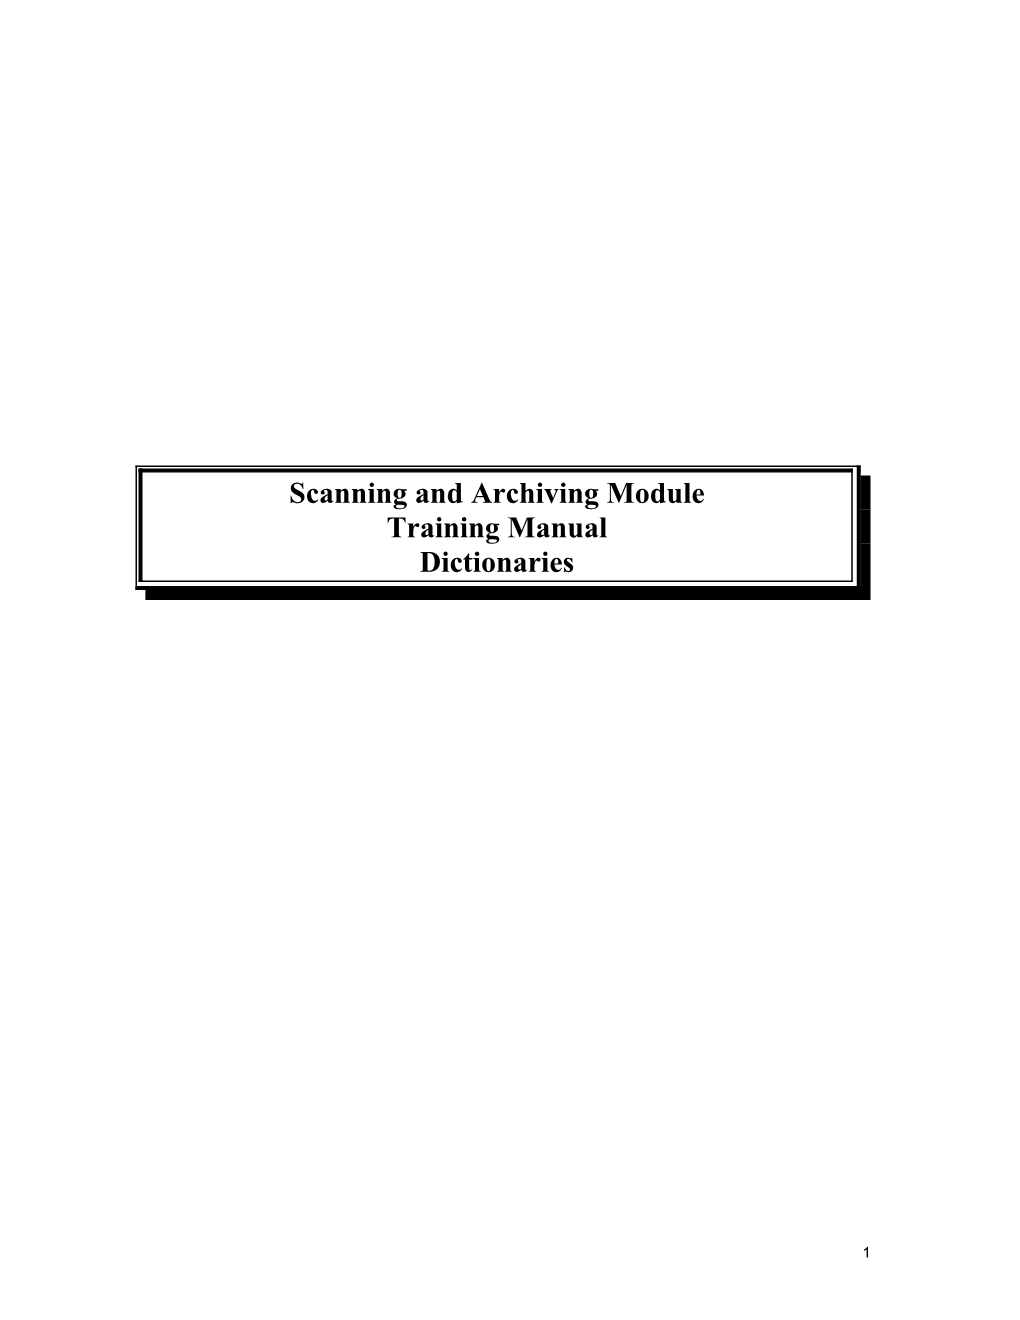 Scanning and Archiving Module